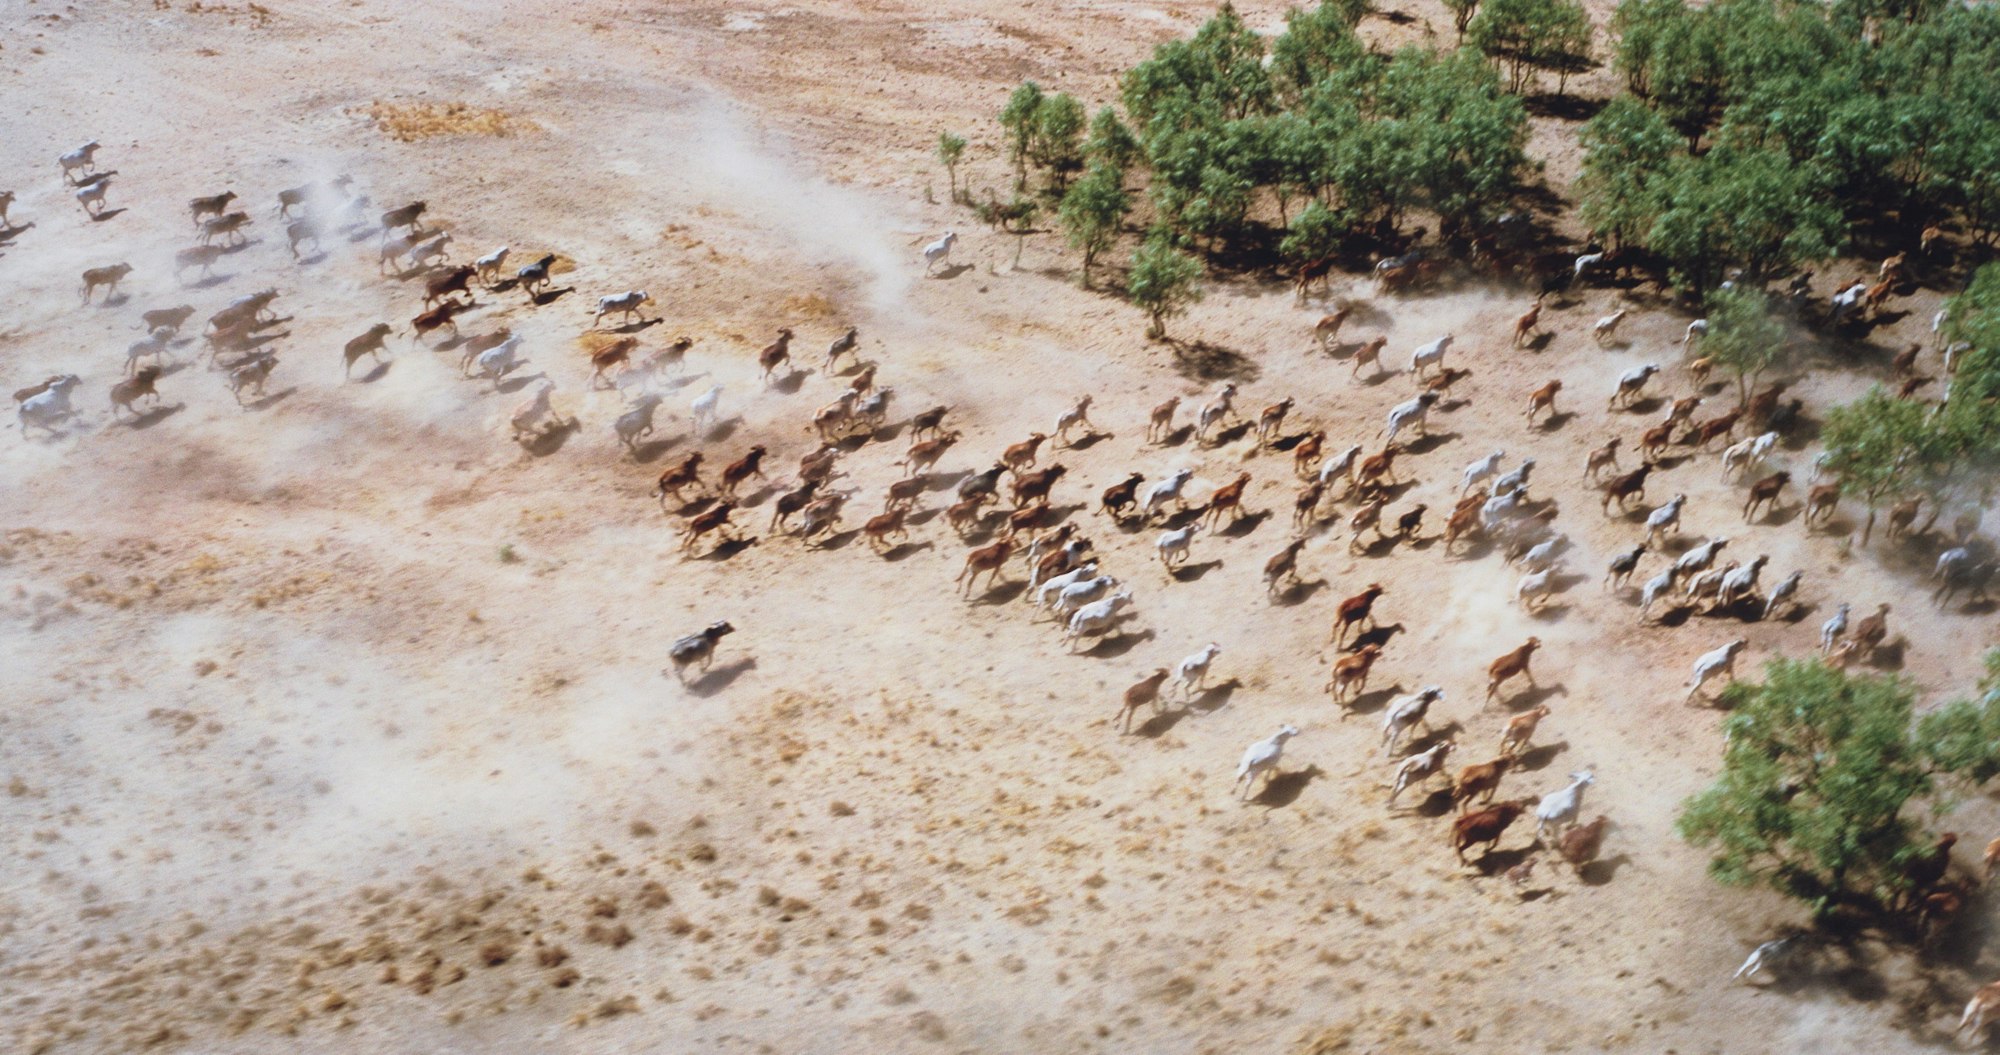 Aerial view of a dusty field with cattle being rounded up towards a few trees